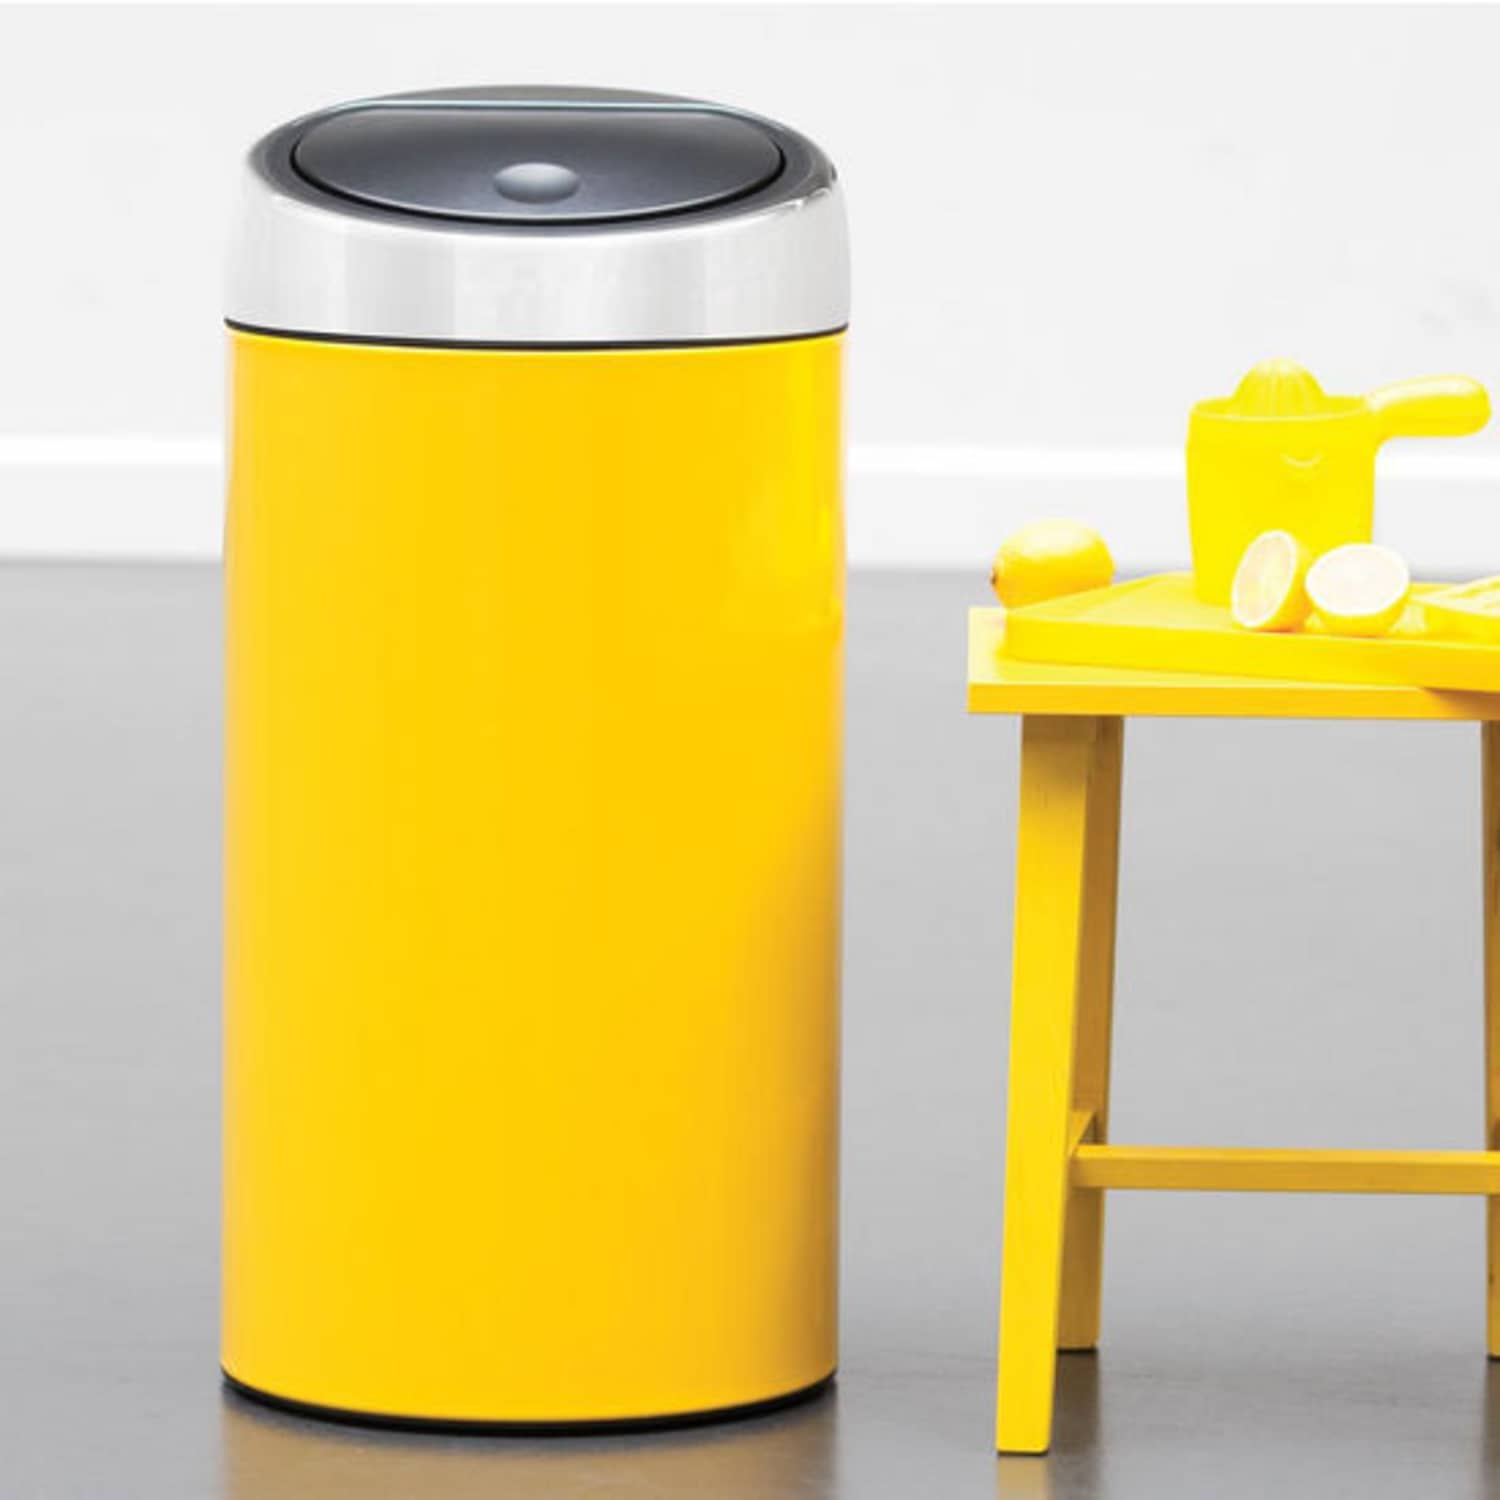 Beyond Stainless Steel Colorful Kitchen Trash Cans from Brabantia Kitchn